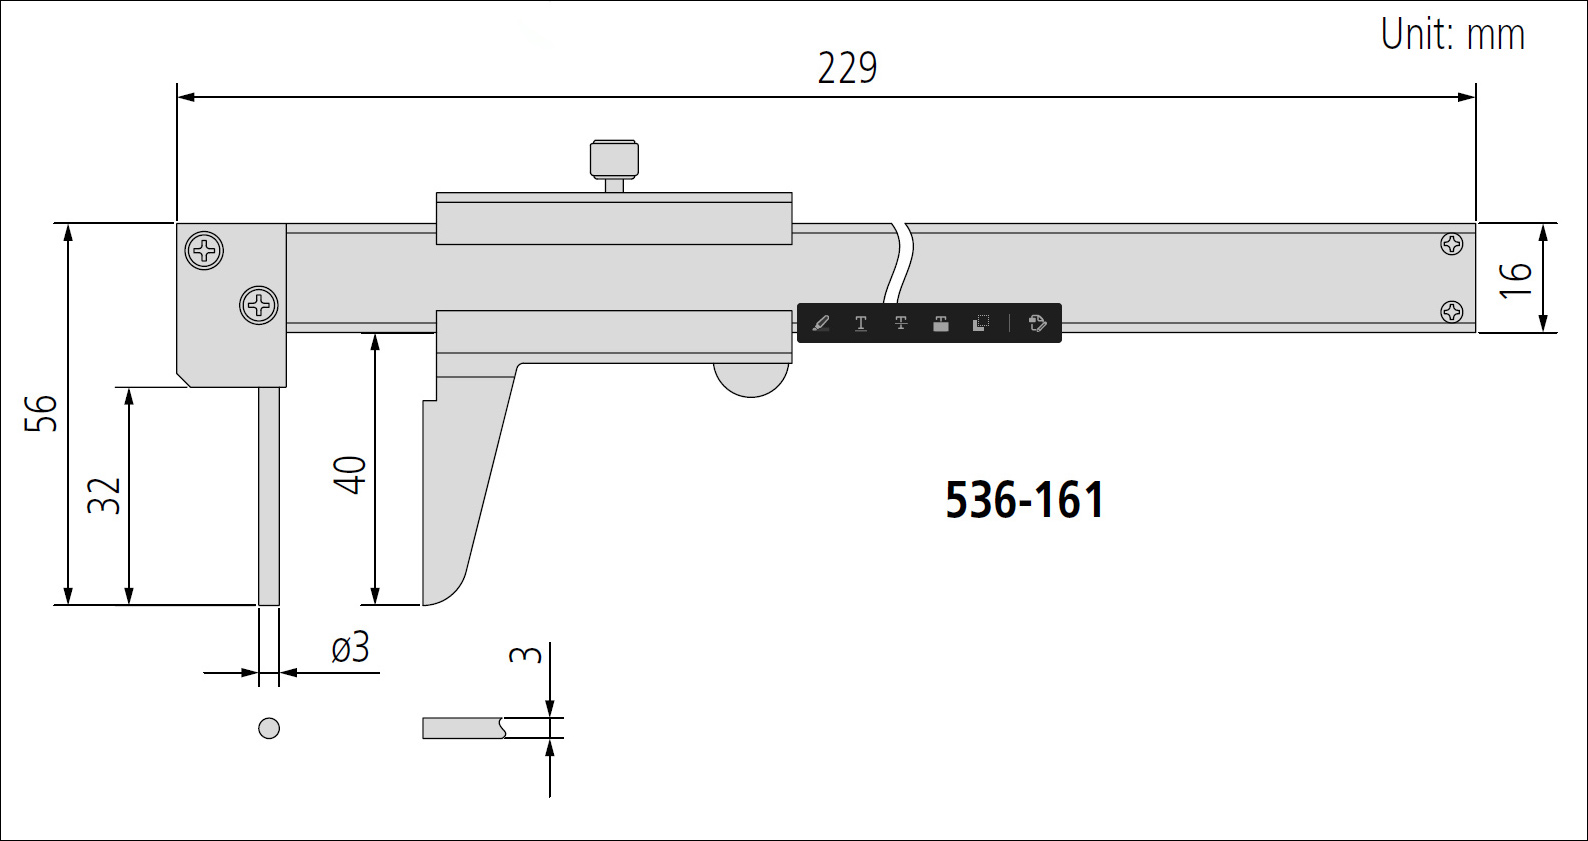 Mitutoyo series 536 tube thickness dimensions.